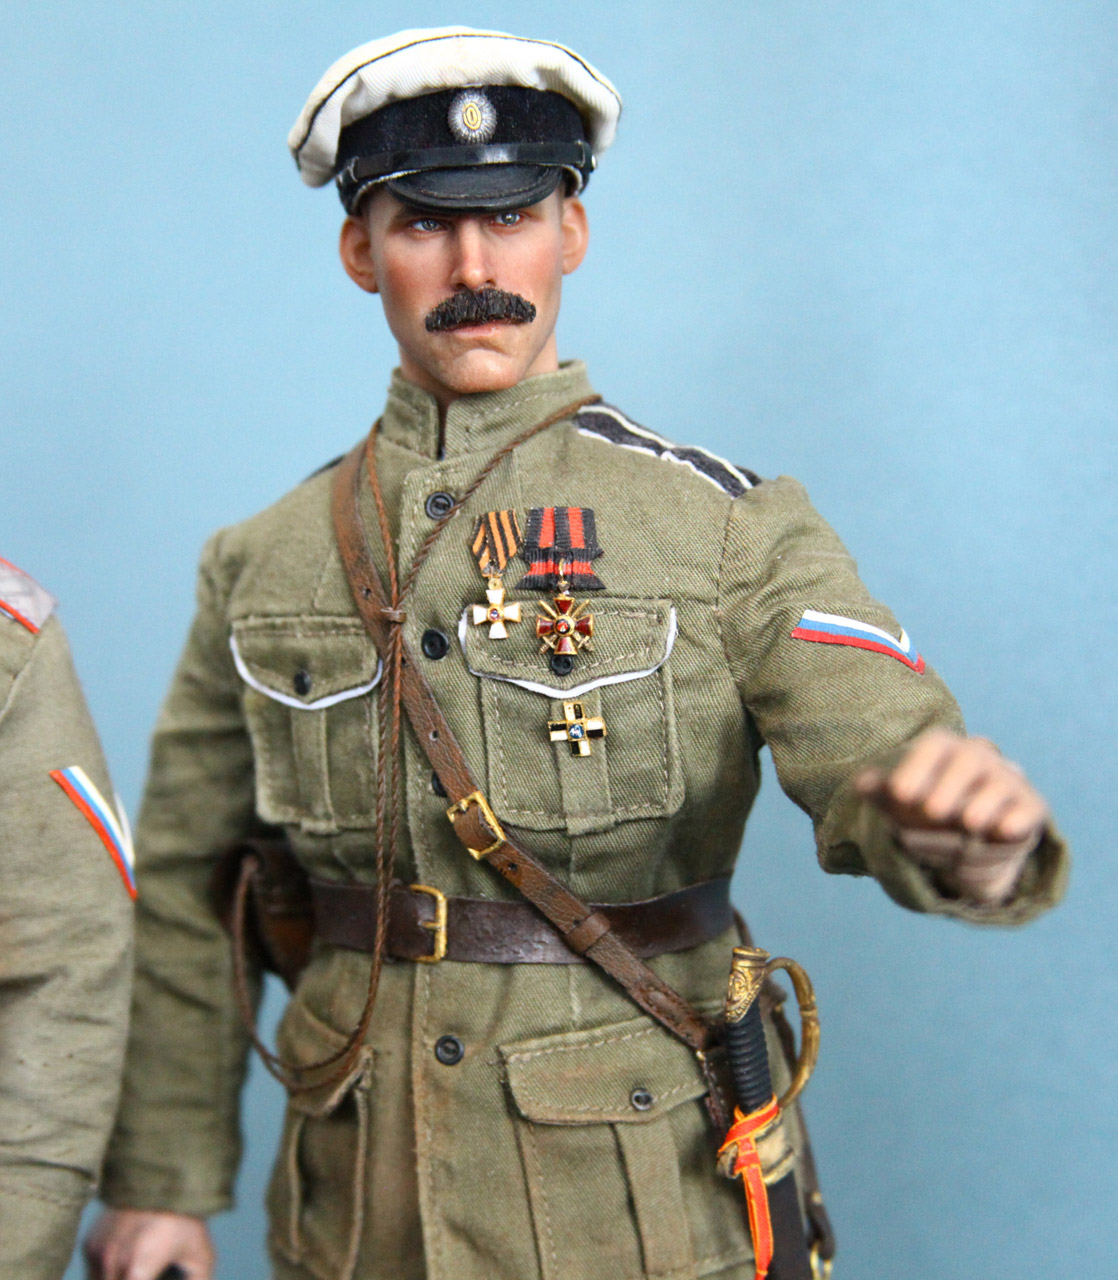 Figures: Lieutenant-general S.L.Markov and captain of 1st Officers regt., 1918, photo #7